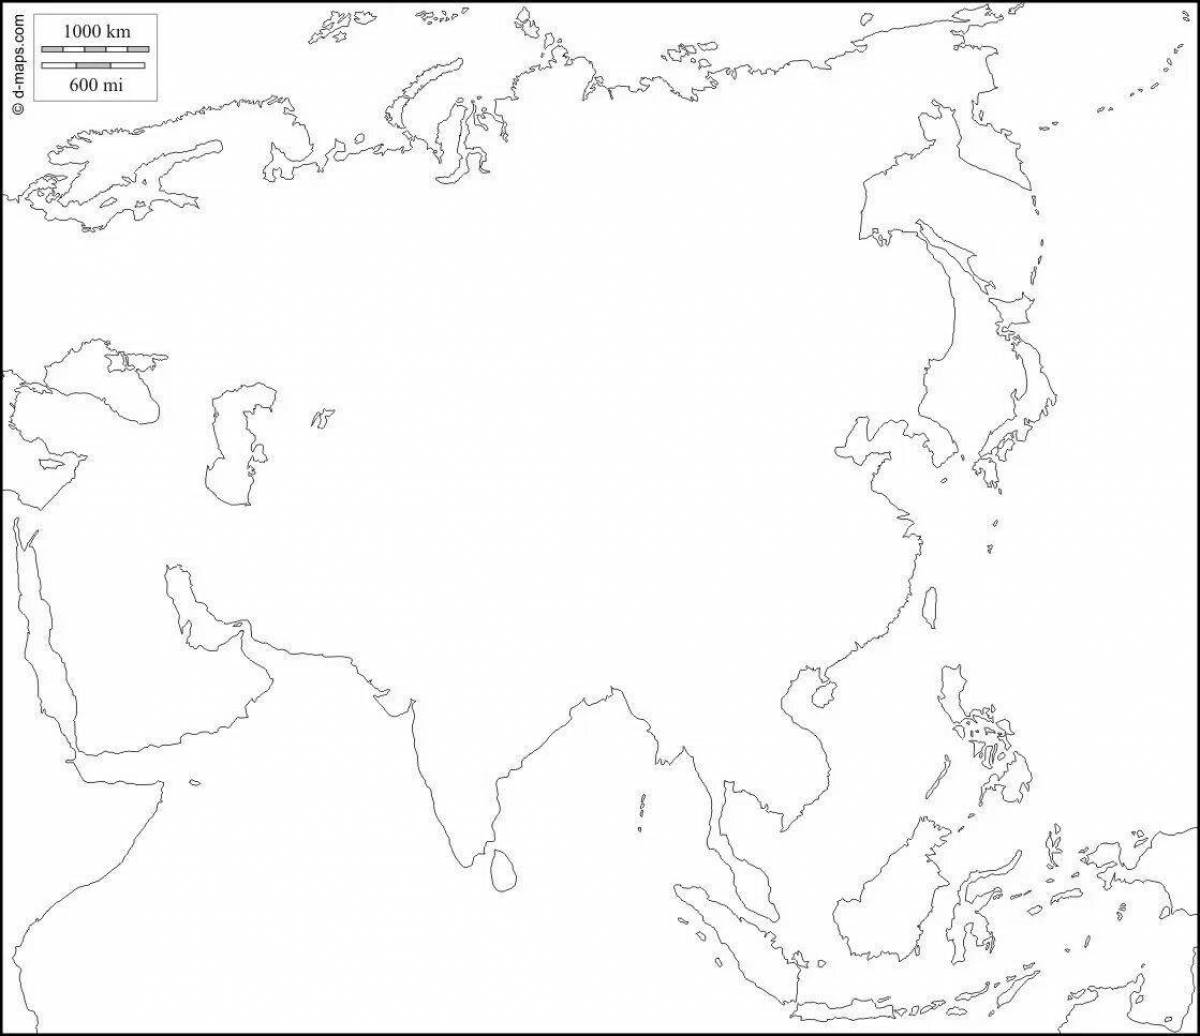 Coloring page impressive map of eurasia